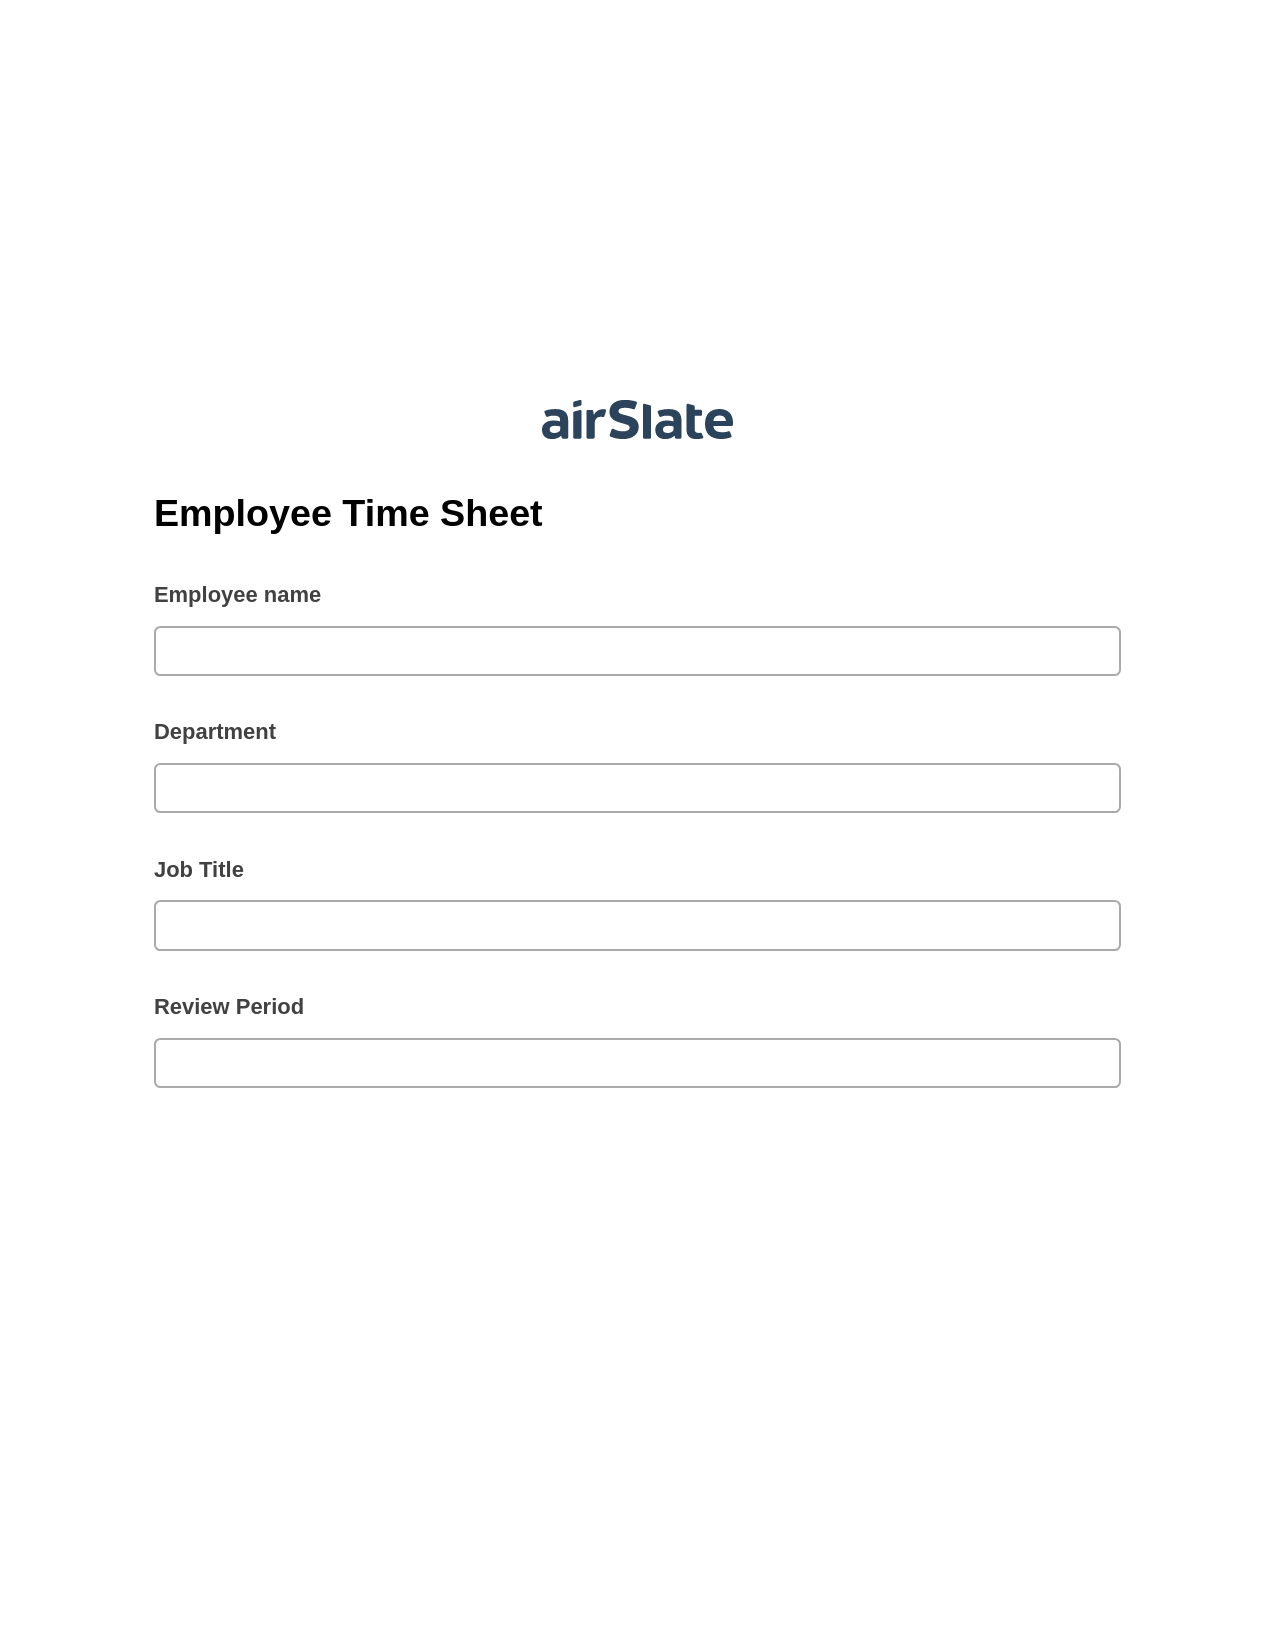 Employee Time Sheet Pre-fill Dropdowns from CSV file Bot, Create slate addon, Archive to Google Drive Bot